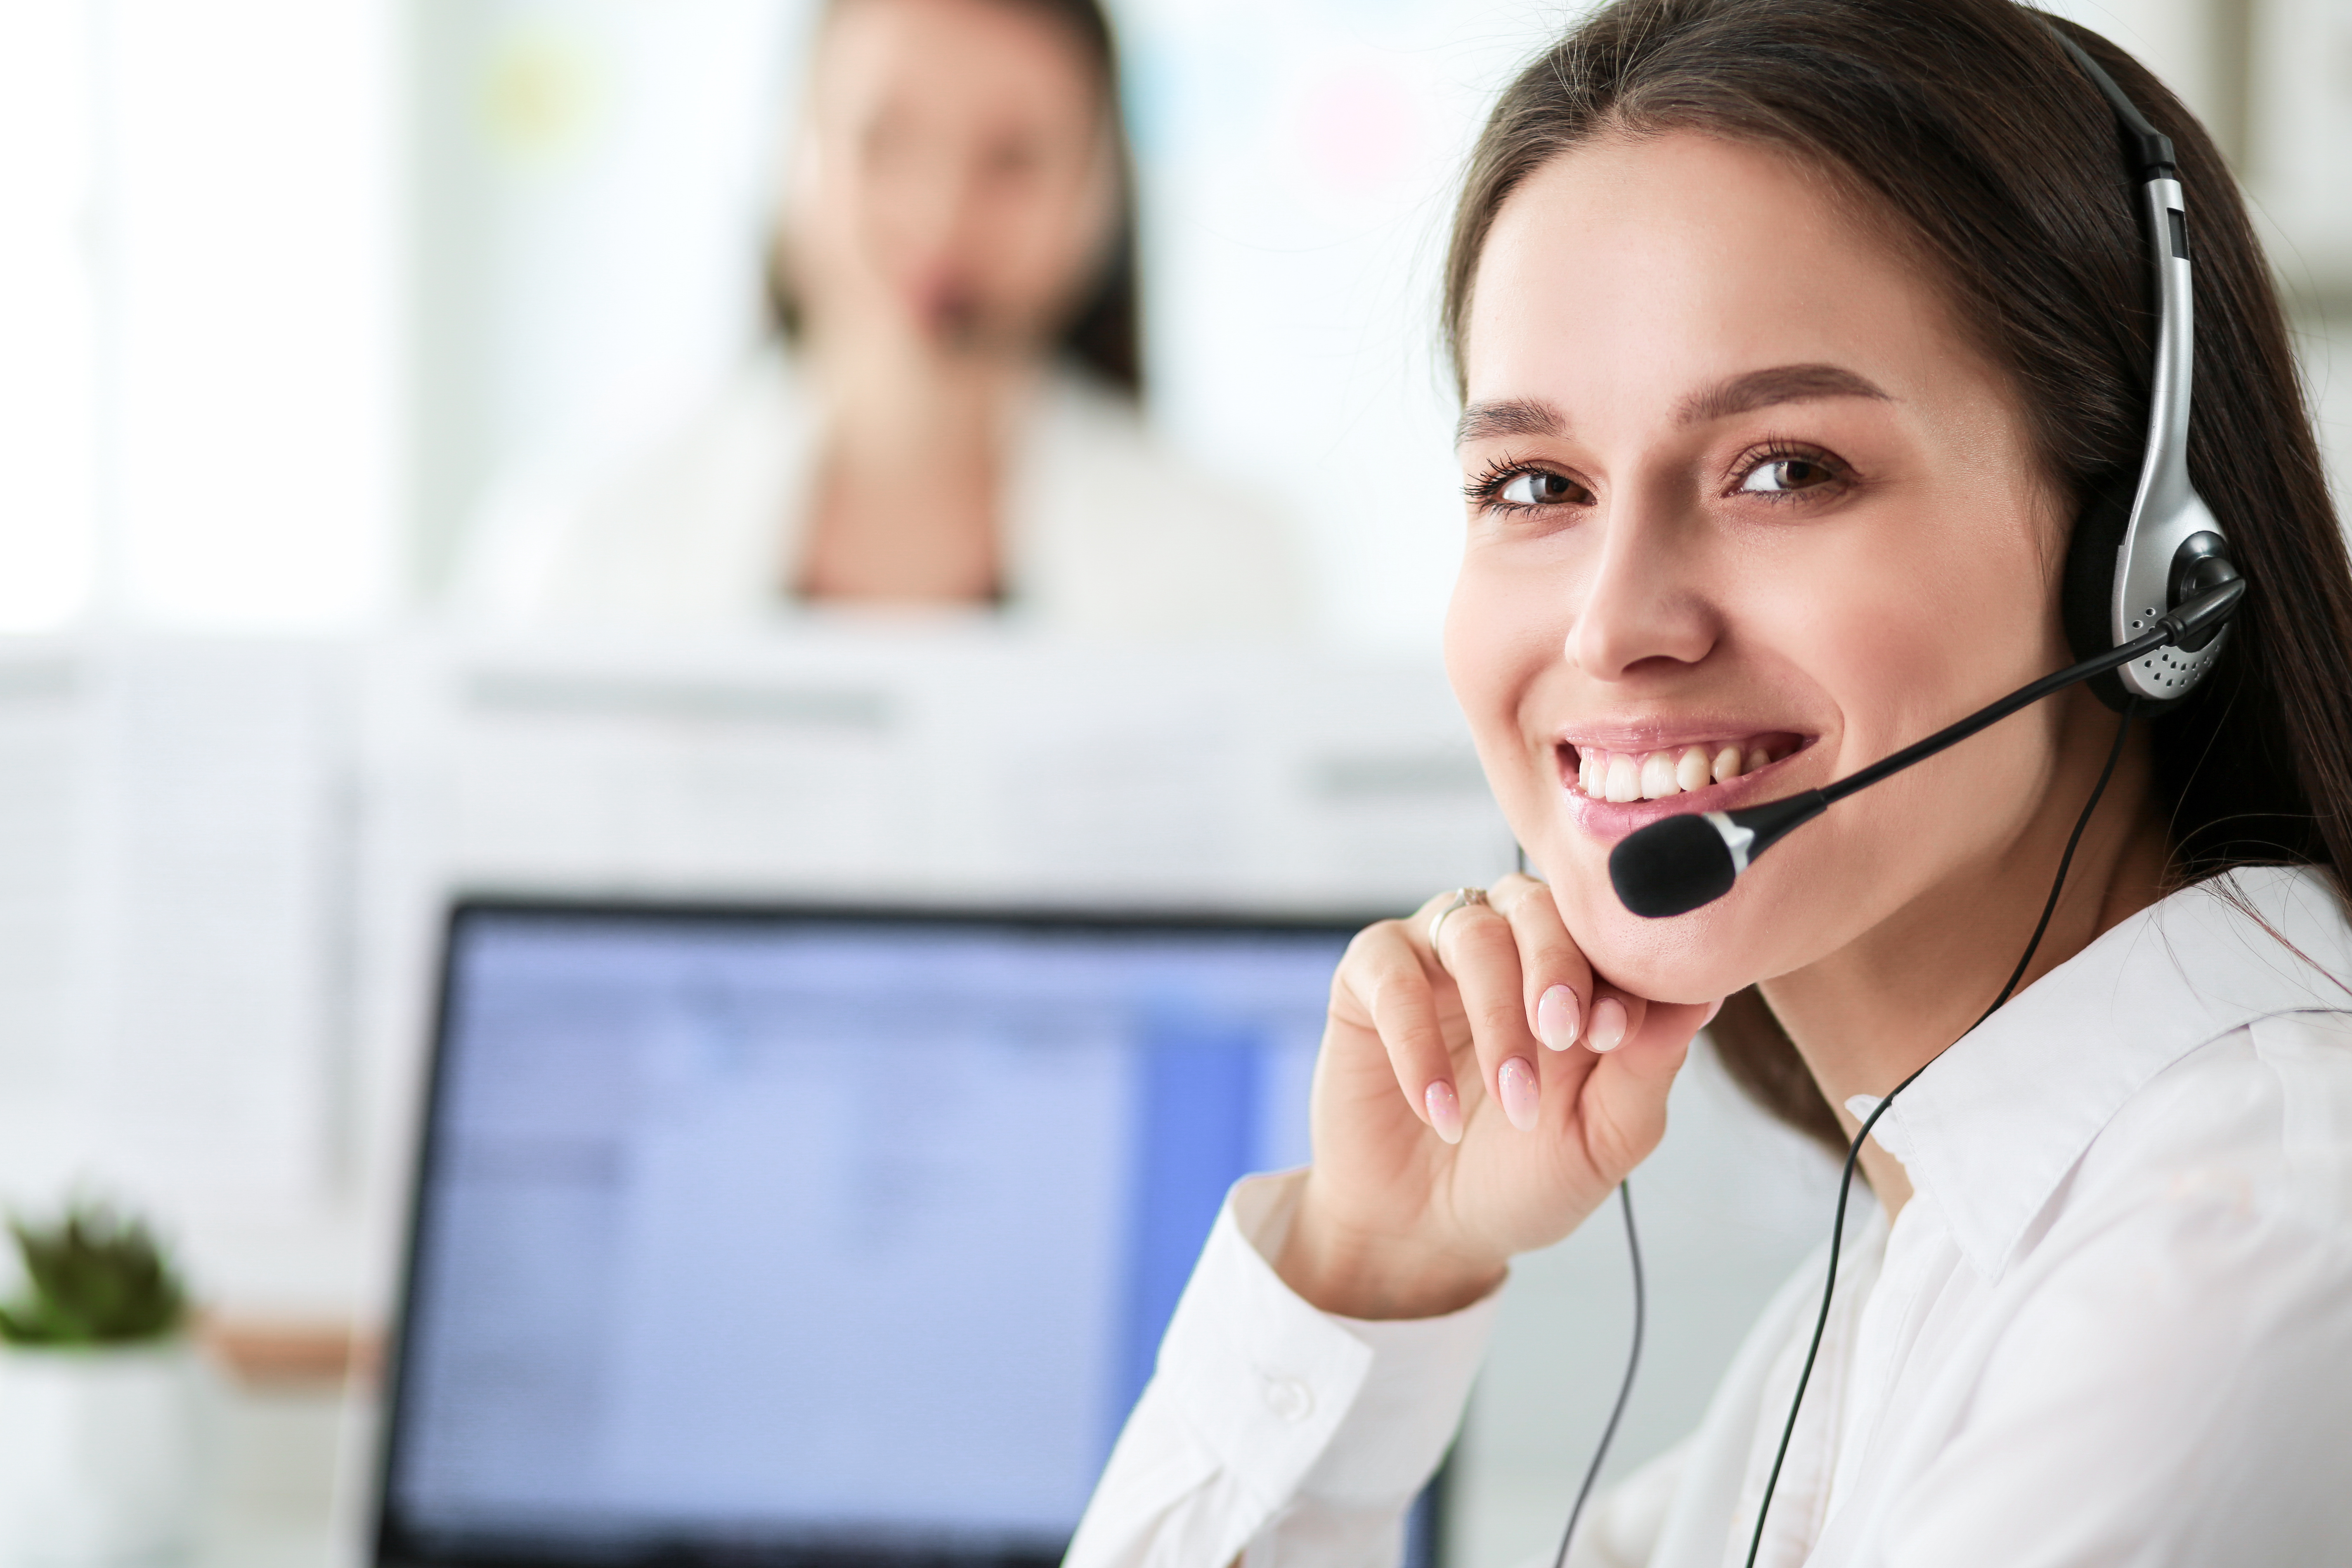  Smiling businesswoman or helpline operator with headset and computer at office 